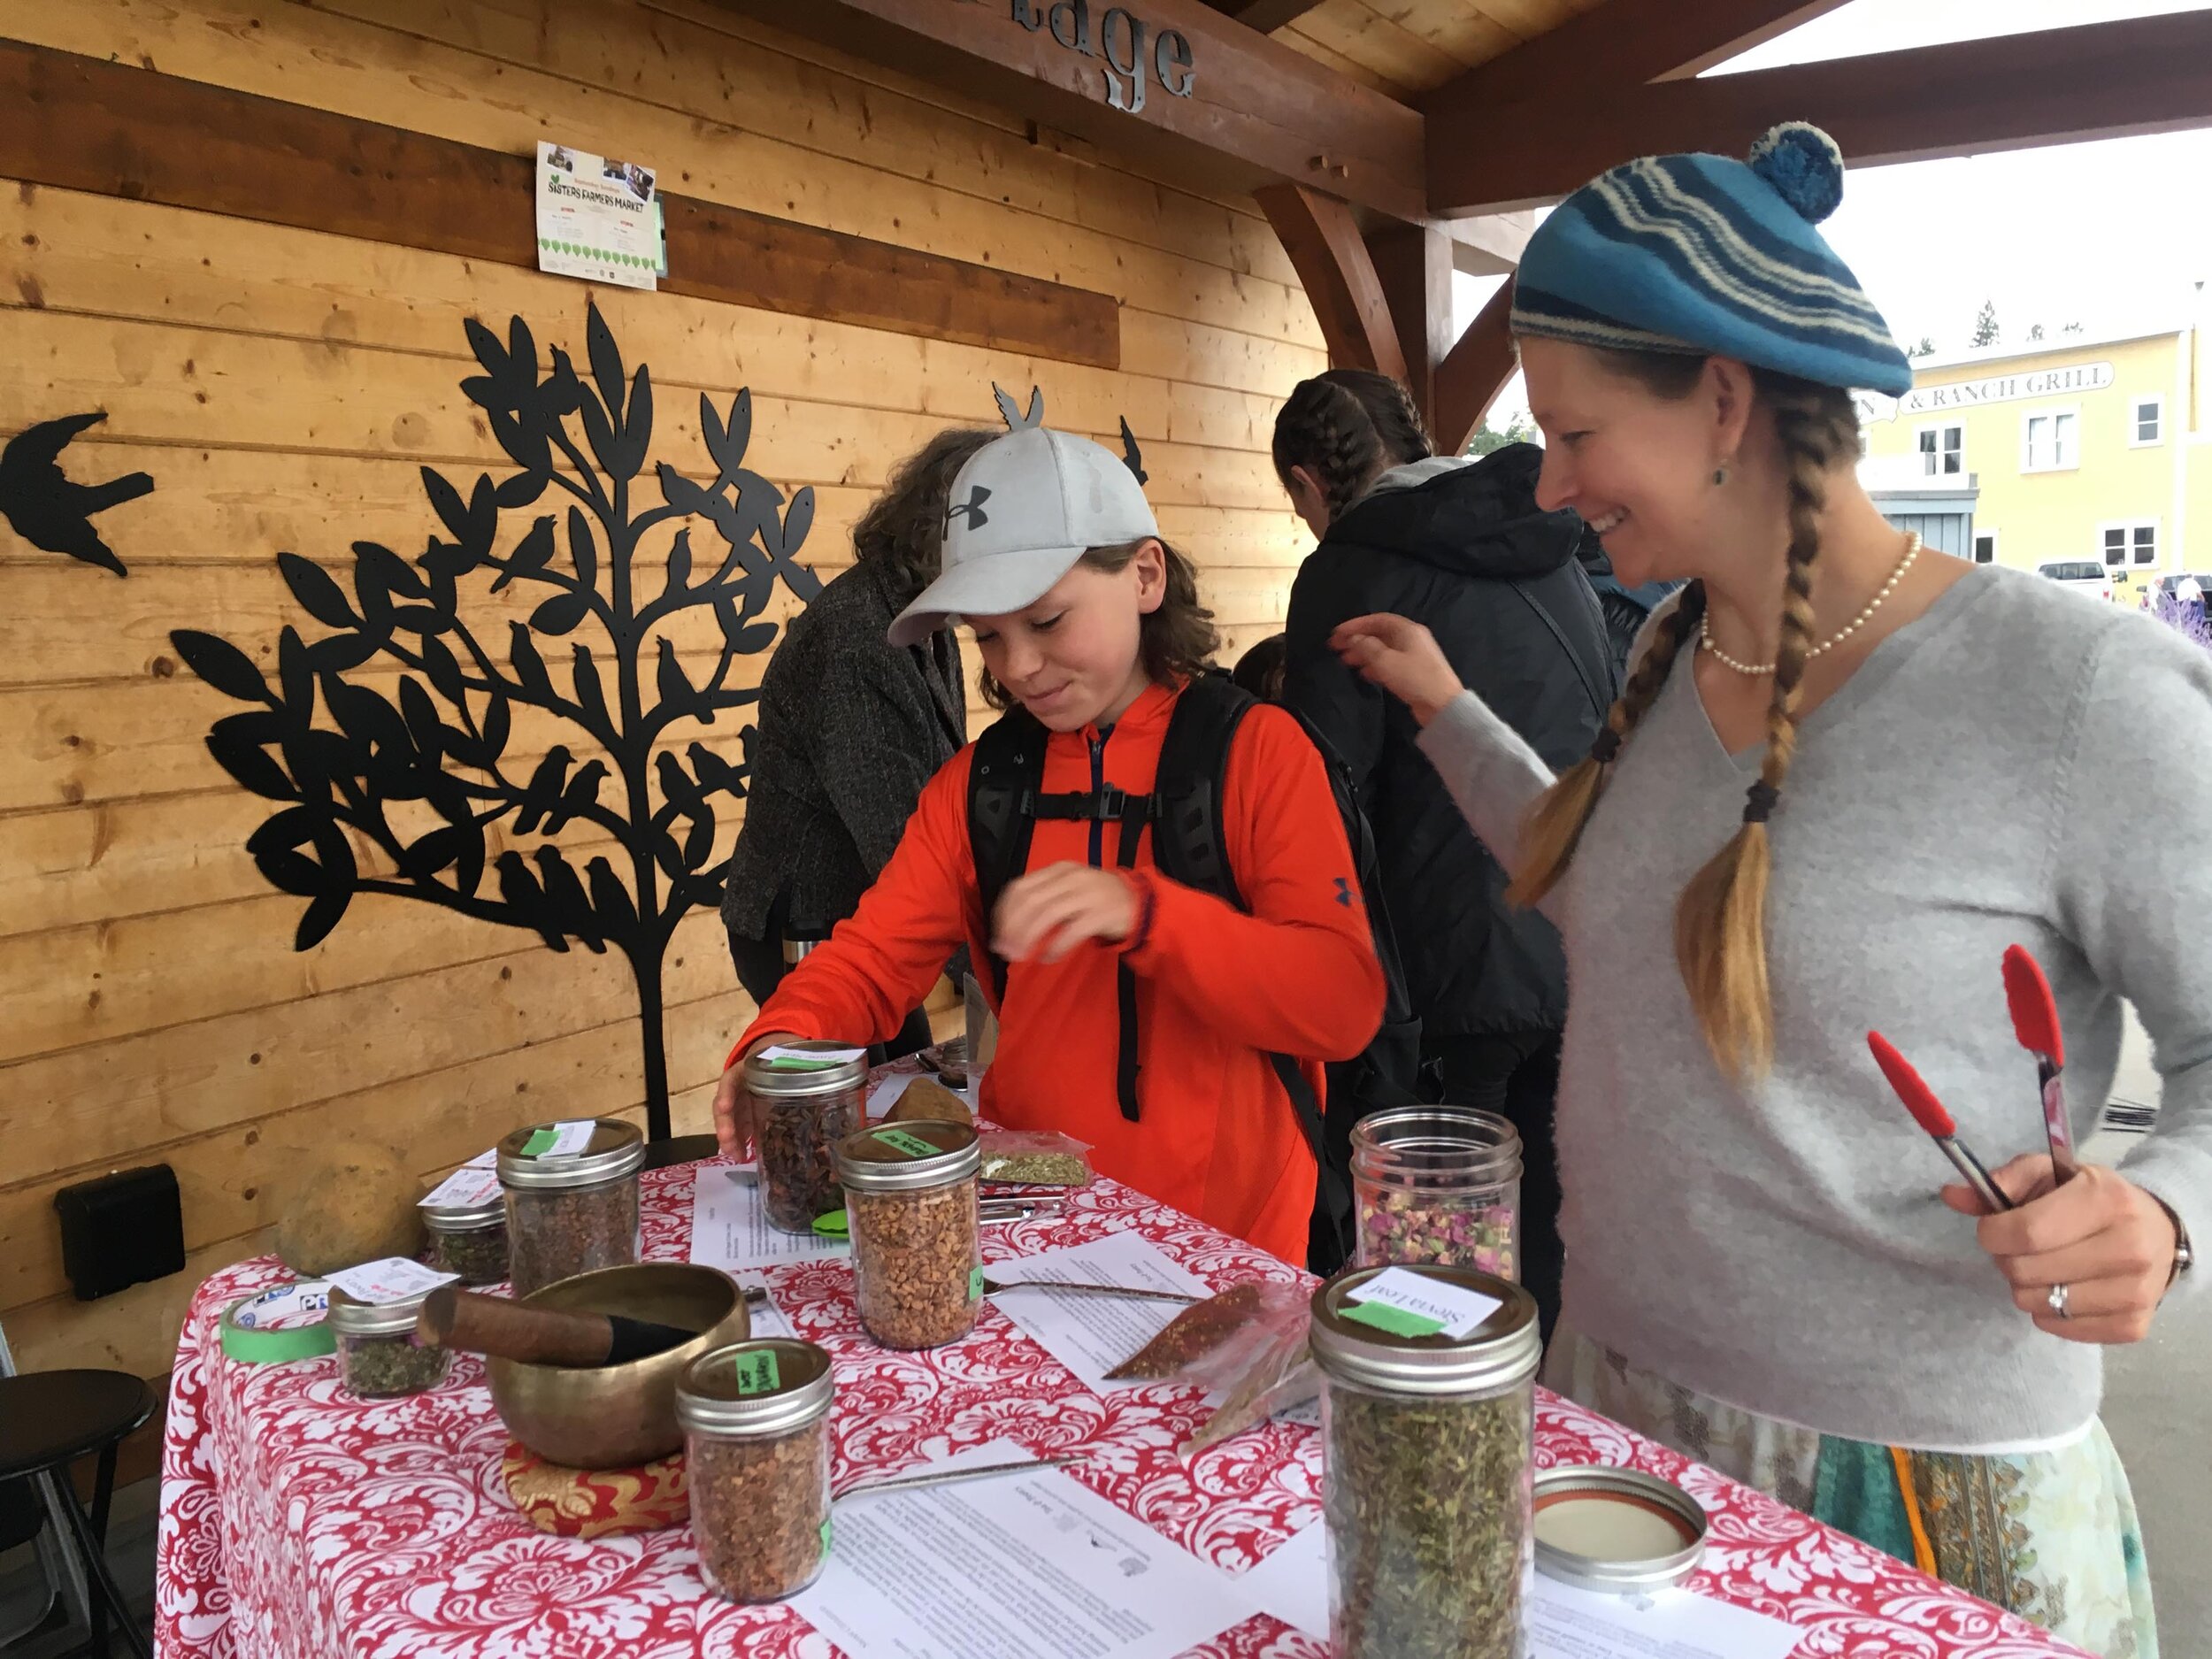  Amy Stahl and her stepson Owen blended their own herbal taisan (tea) mixtures to take home, while poetry rang out around the stage.  